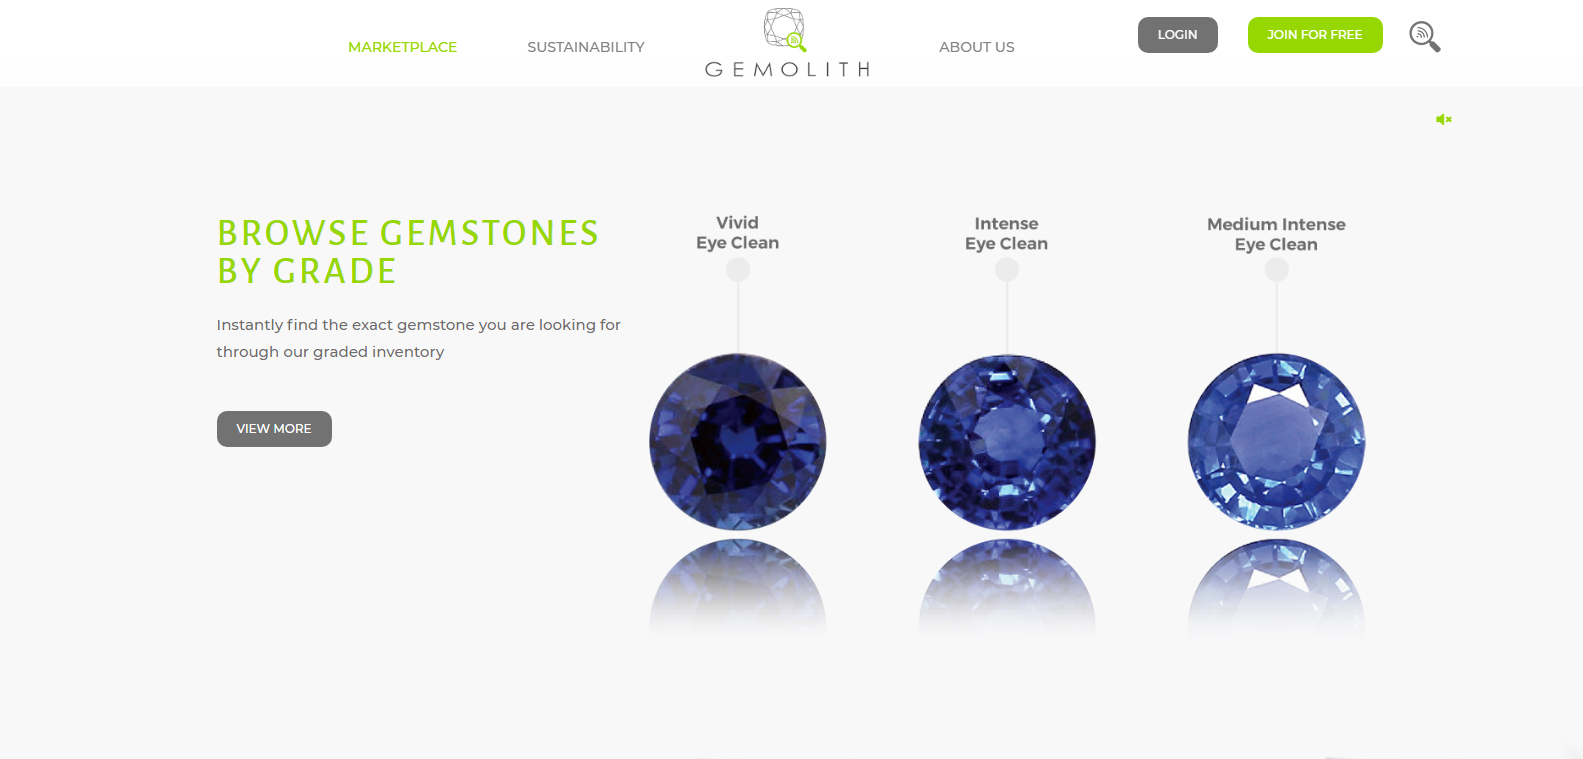 Now, if you have not visited Gemolith.com yet, do take a look at the selection of stones on the website